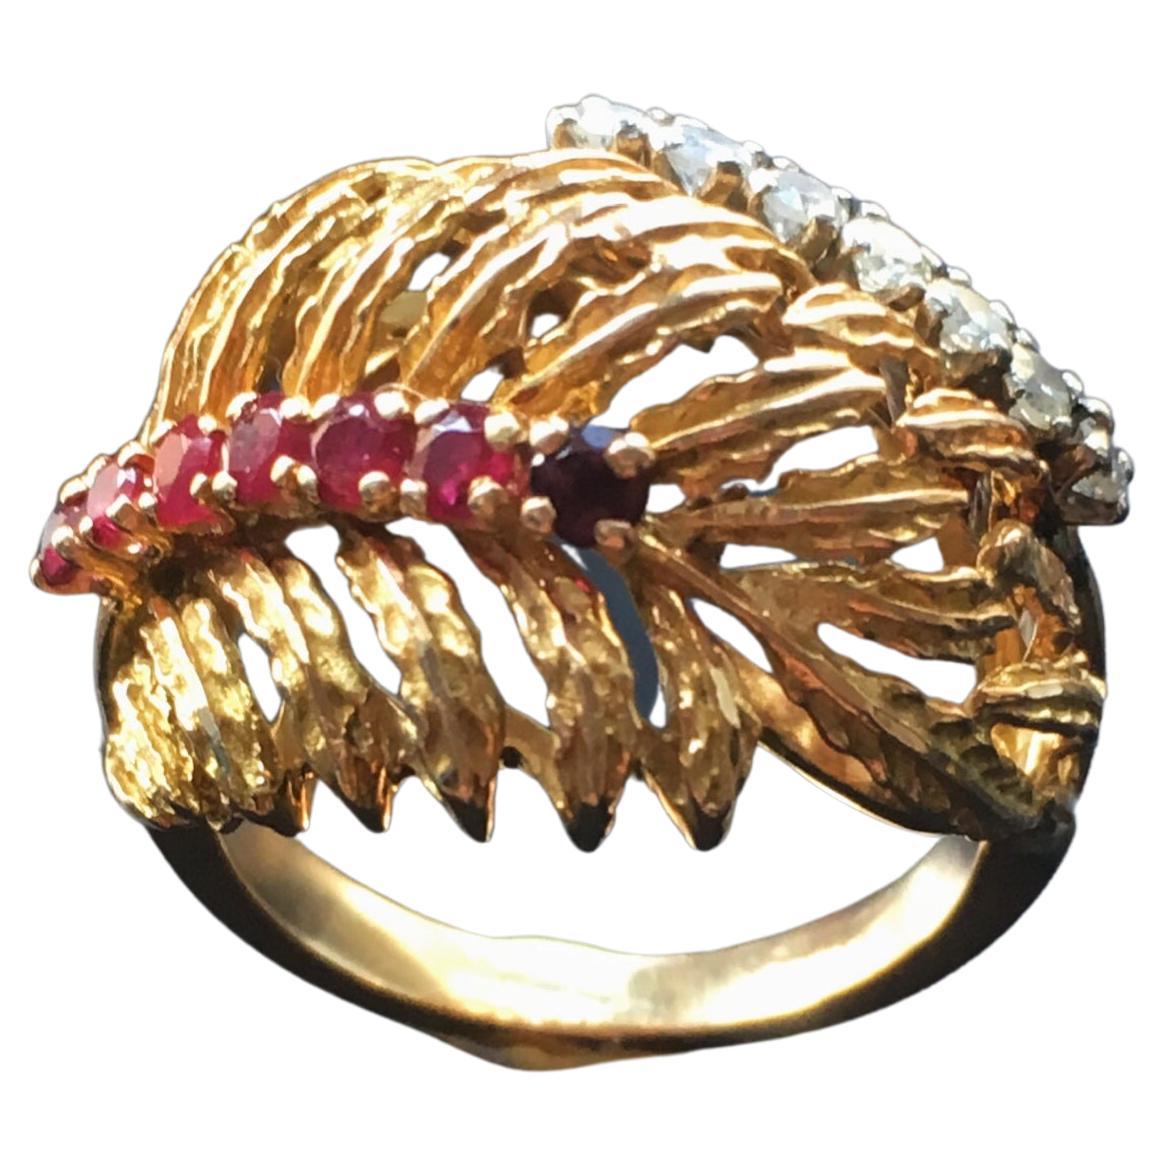 French Retro diamond ruby 18K gold cocktail statement ring